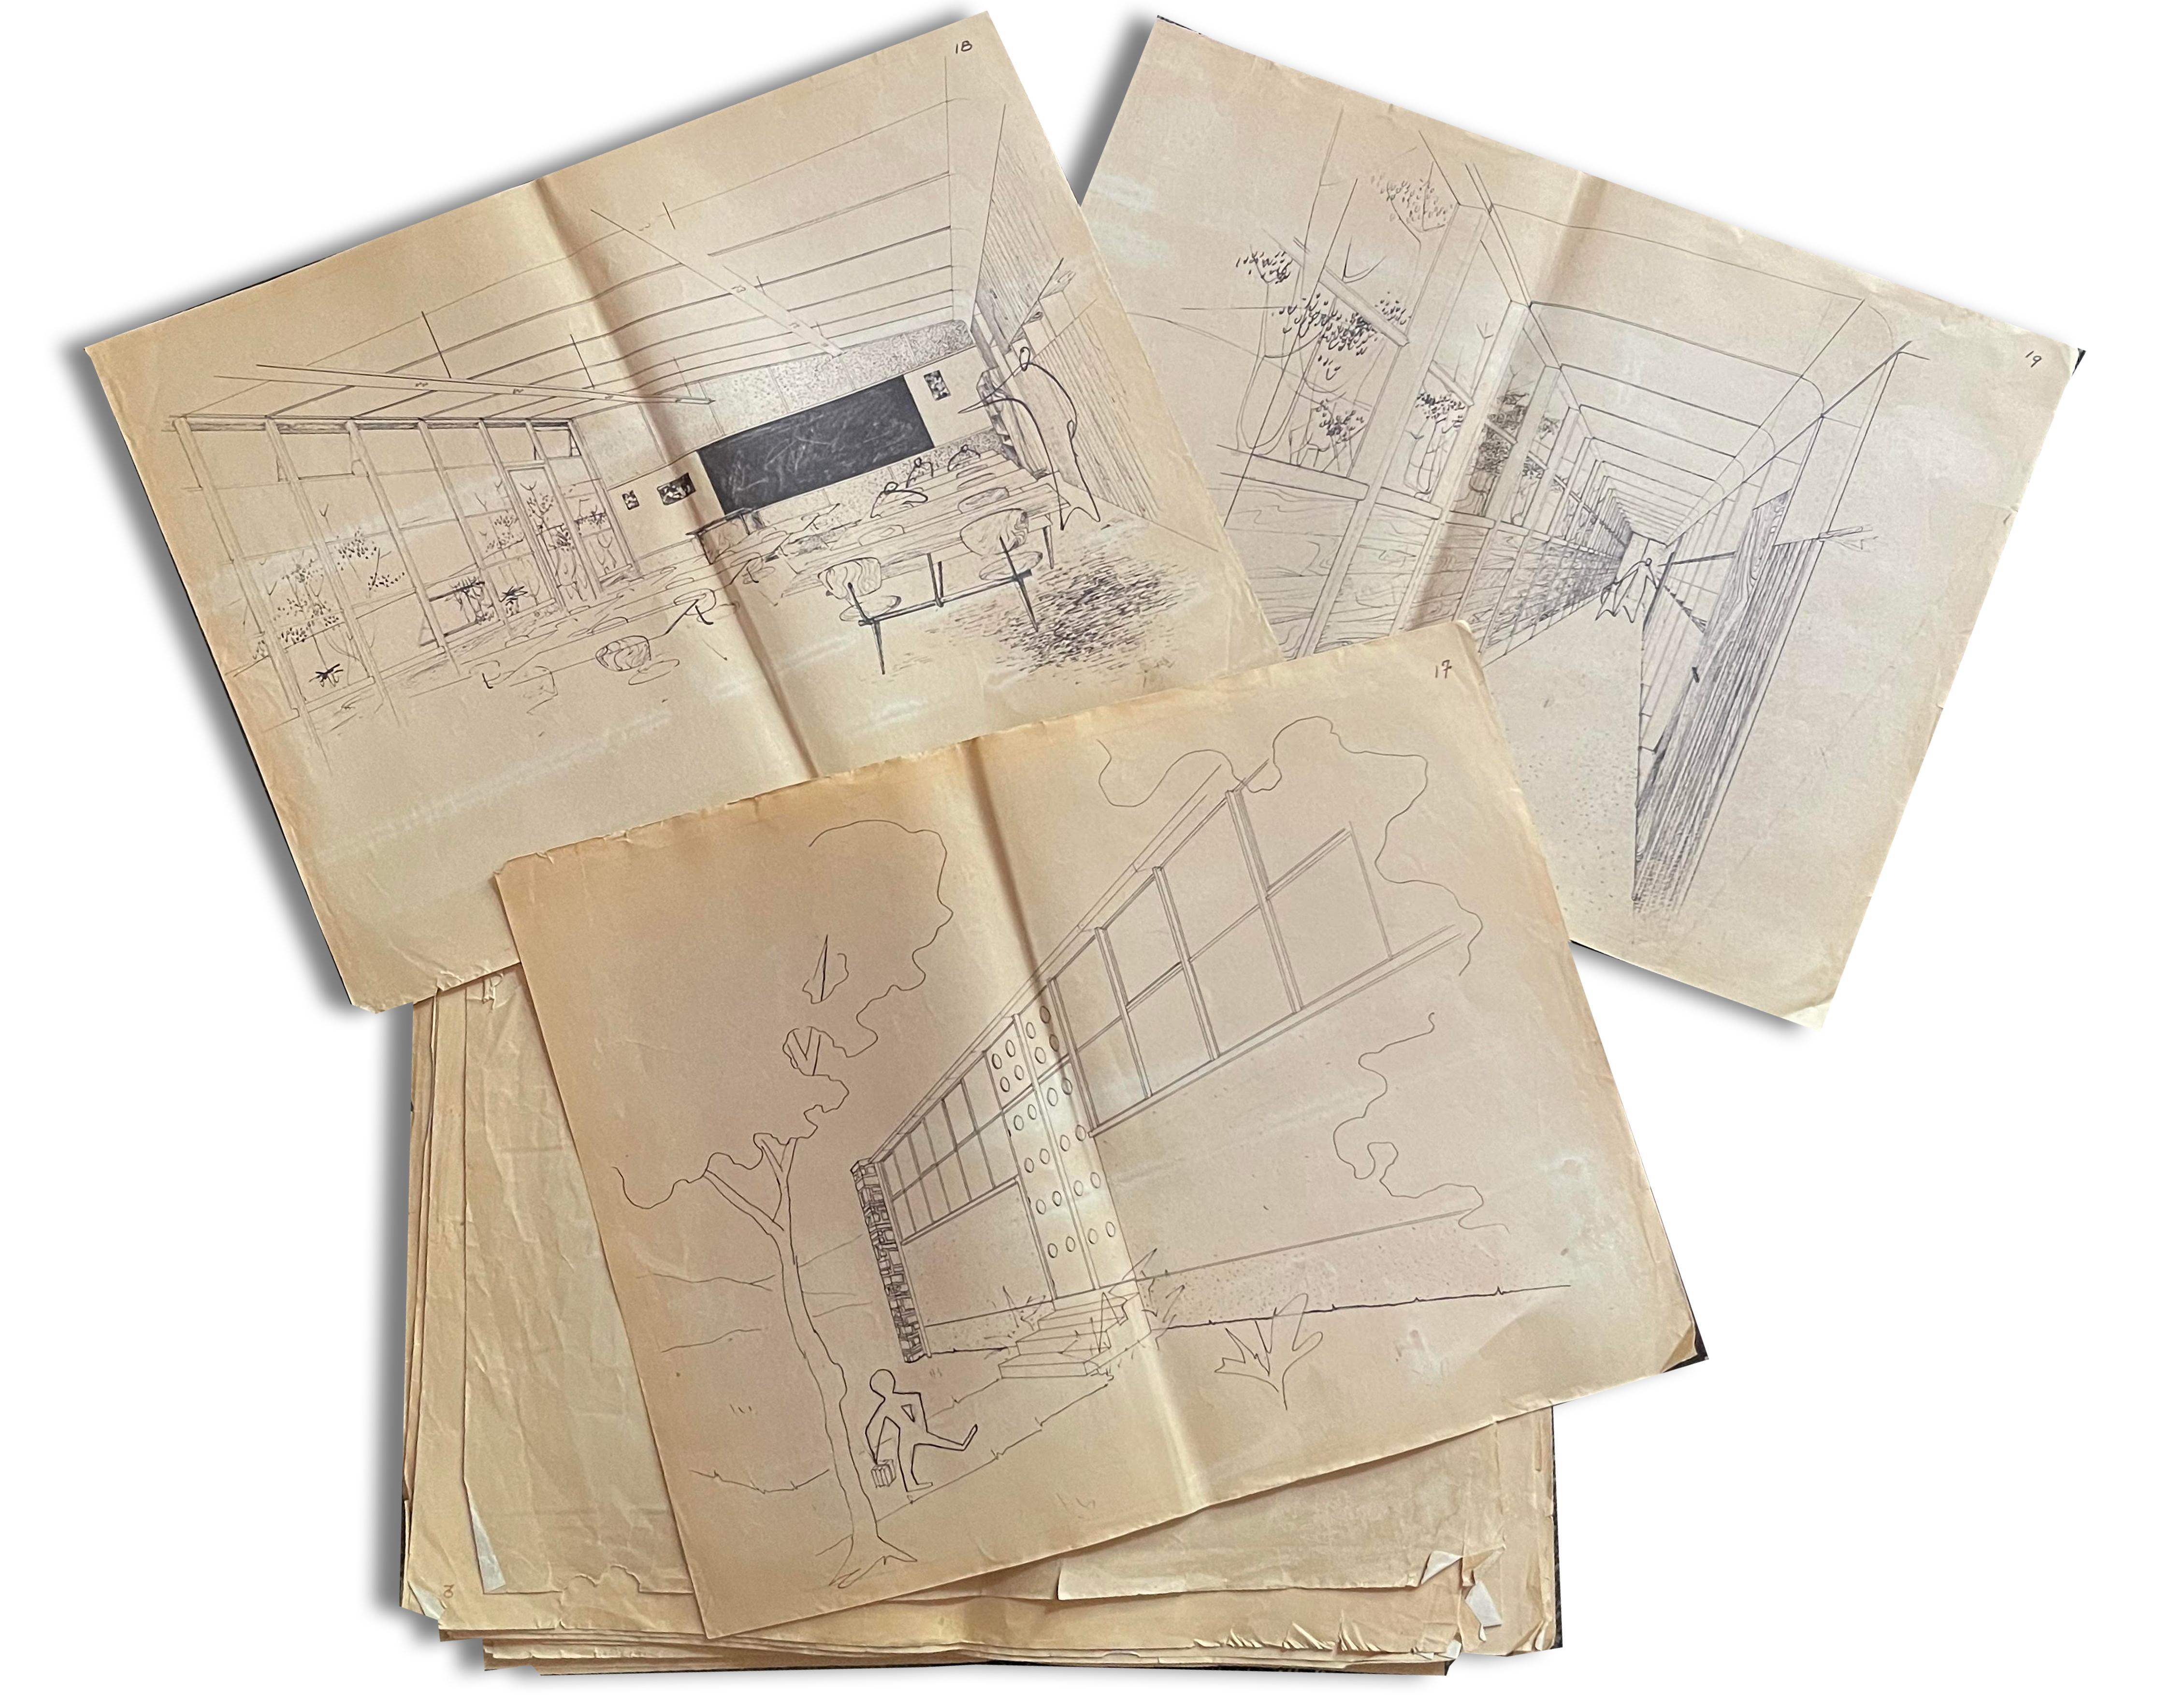 Very rare set of 22 documents from 1952 about school building made by Jean Prouvé. 
Some similar draws are in the collection of Museum Pompidou in Paris. 
ref. school city Dieulouard. 
size of each documents 36 x 30 cm. 
technicals plans of